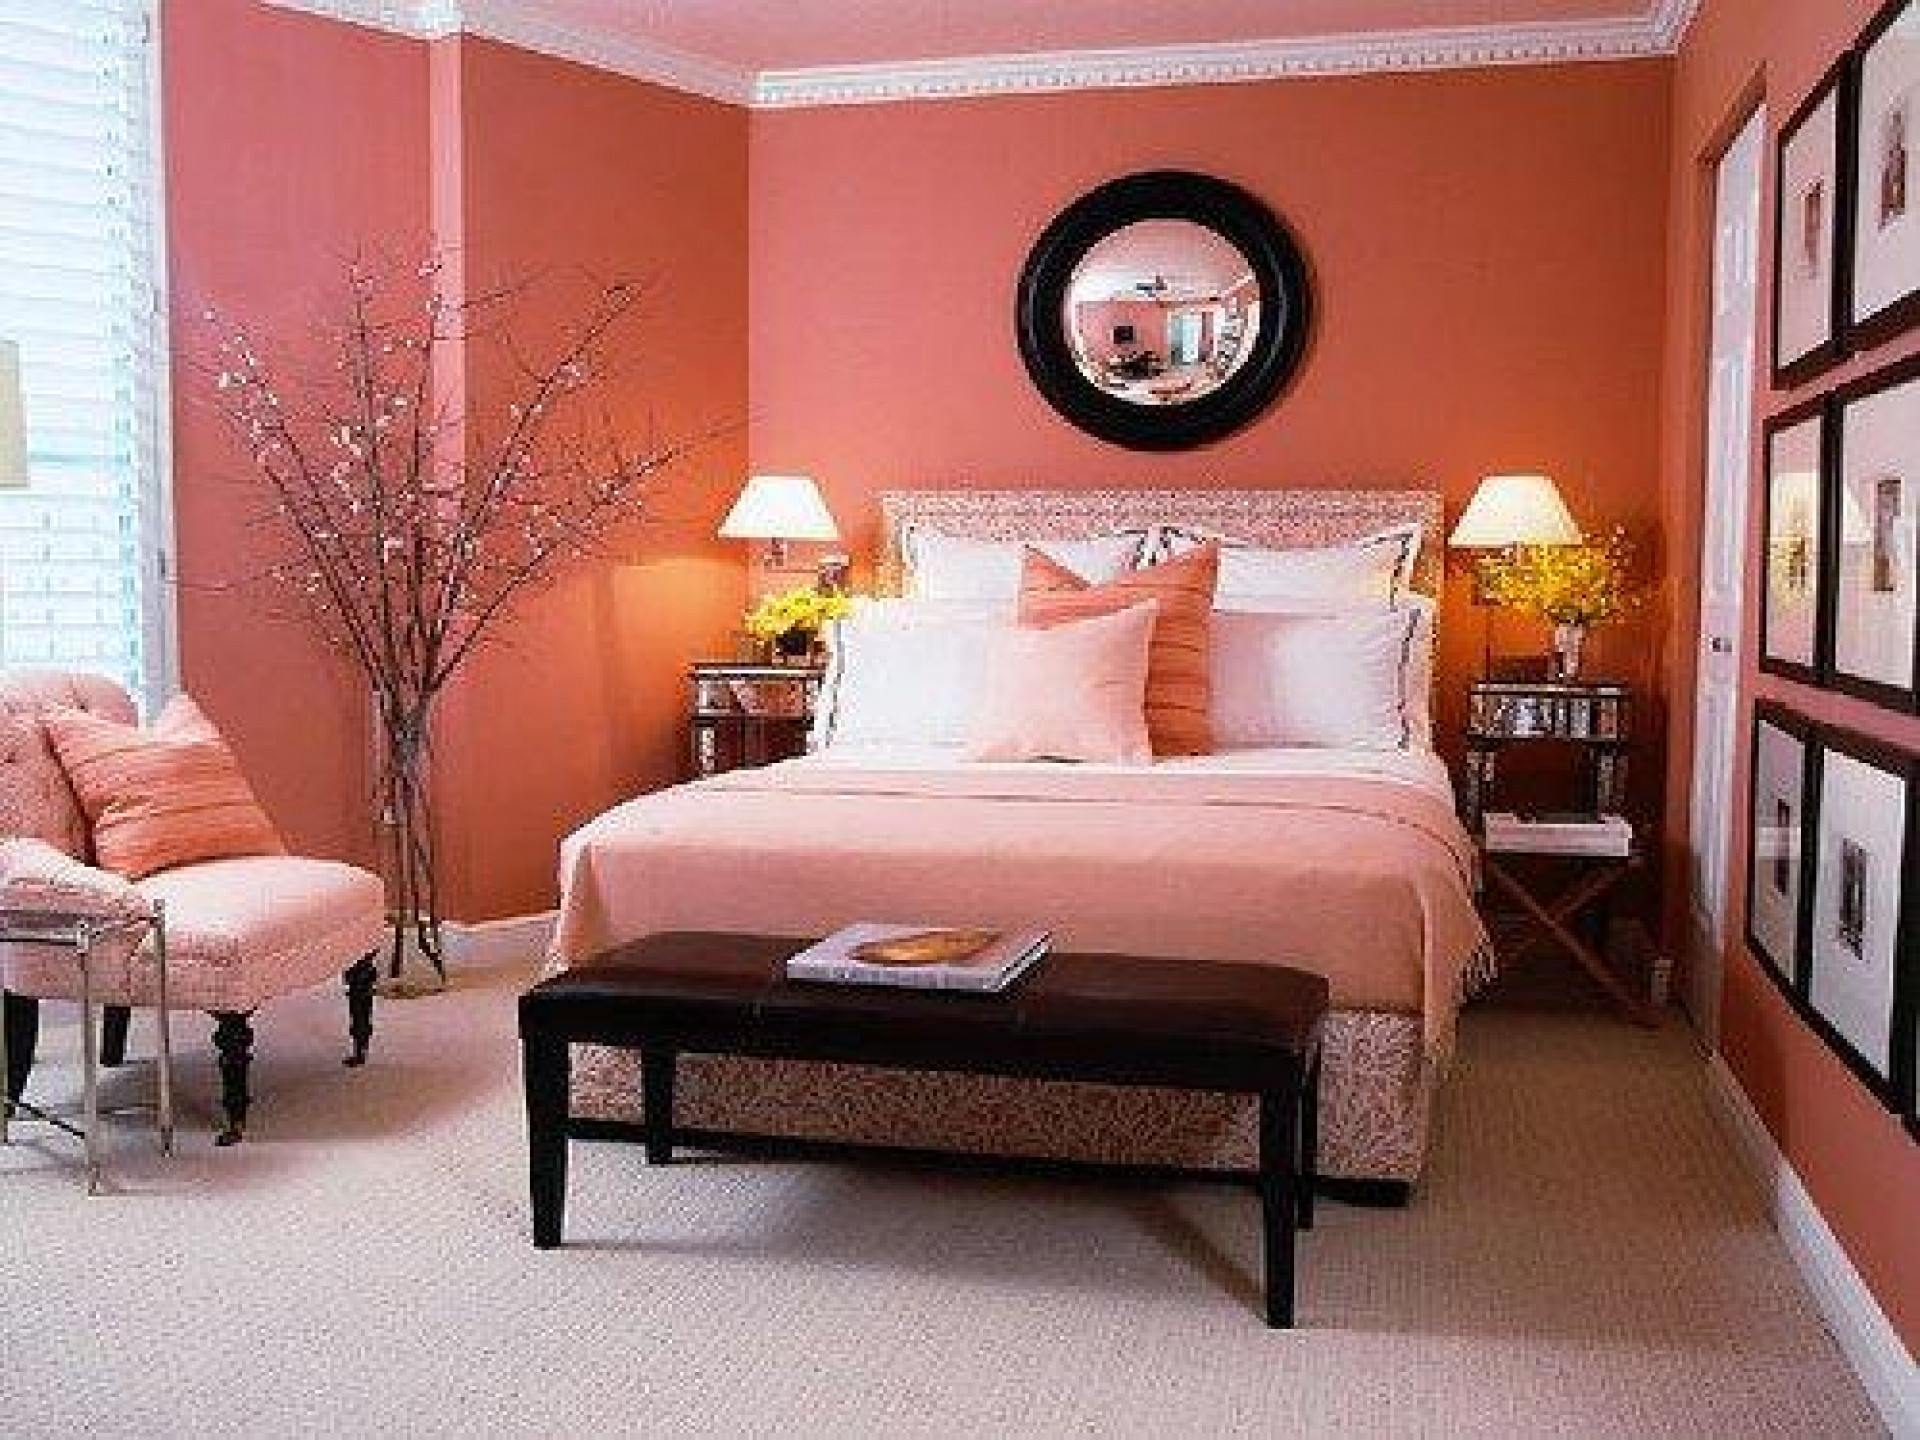 Adult Room Decor
 25 Beautiful Bedroom Ideas For Your Home – The WoW Style